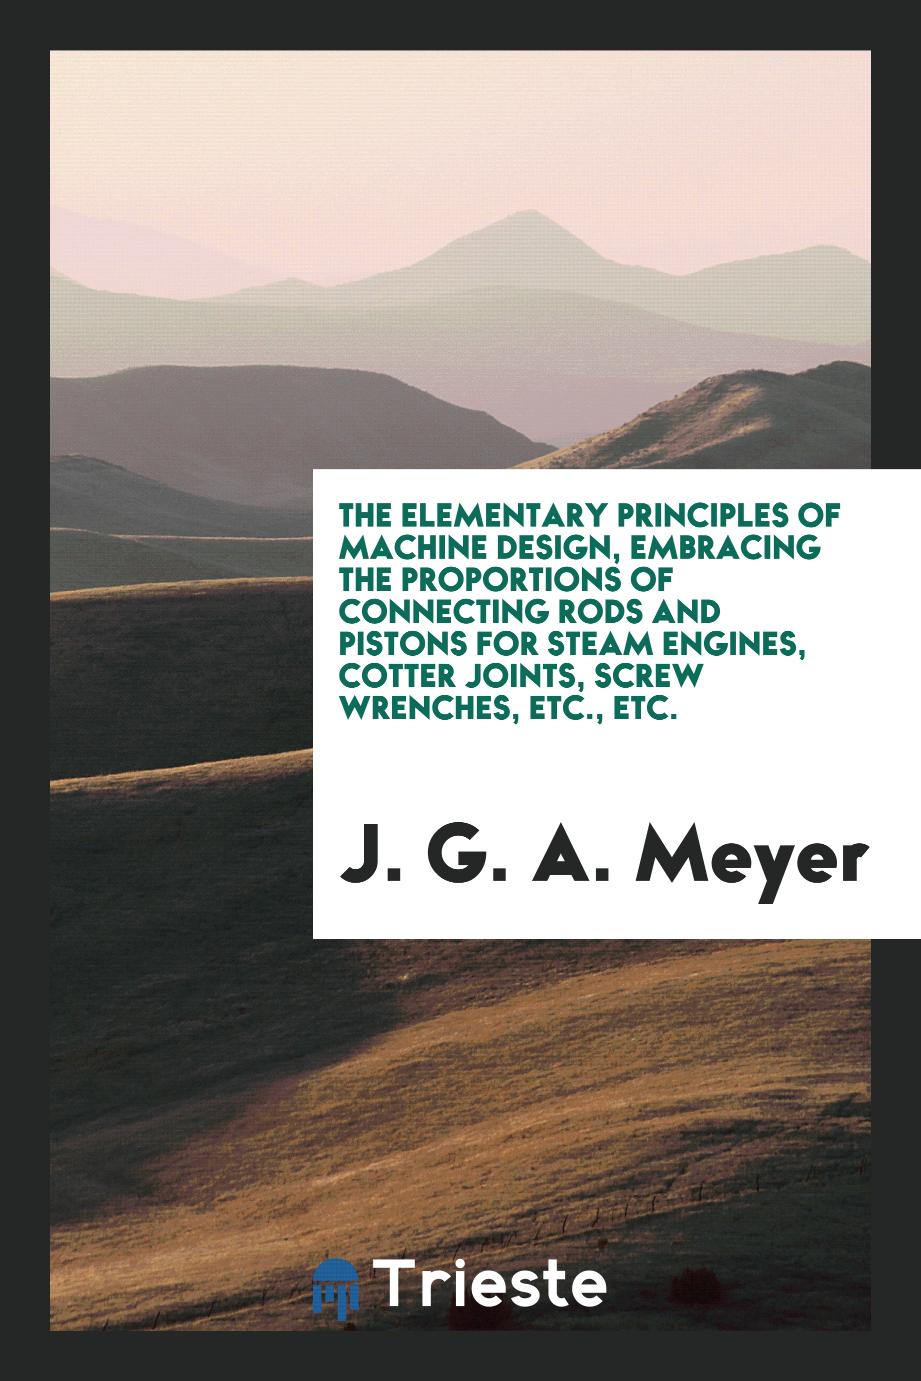 The Elementary Principles of Machine Design, Embracing the Proportions of Connecting Rods and Pistons for Steam Engines, Cotter Joints, Screw Wrenches, Etc., Etc.